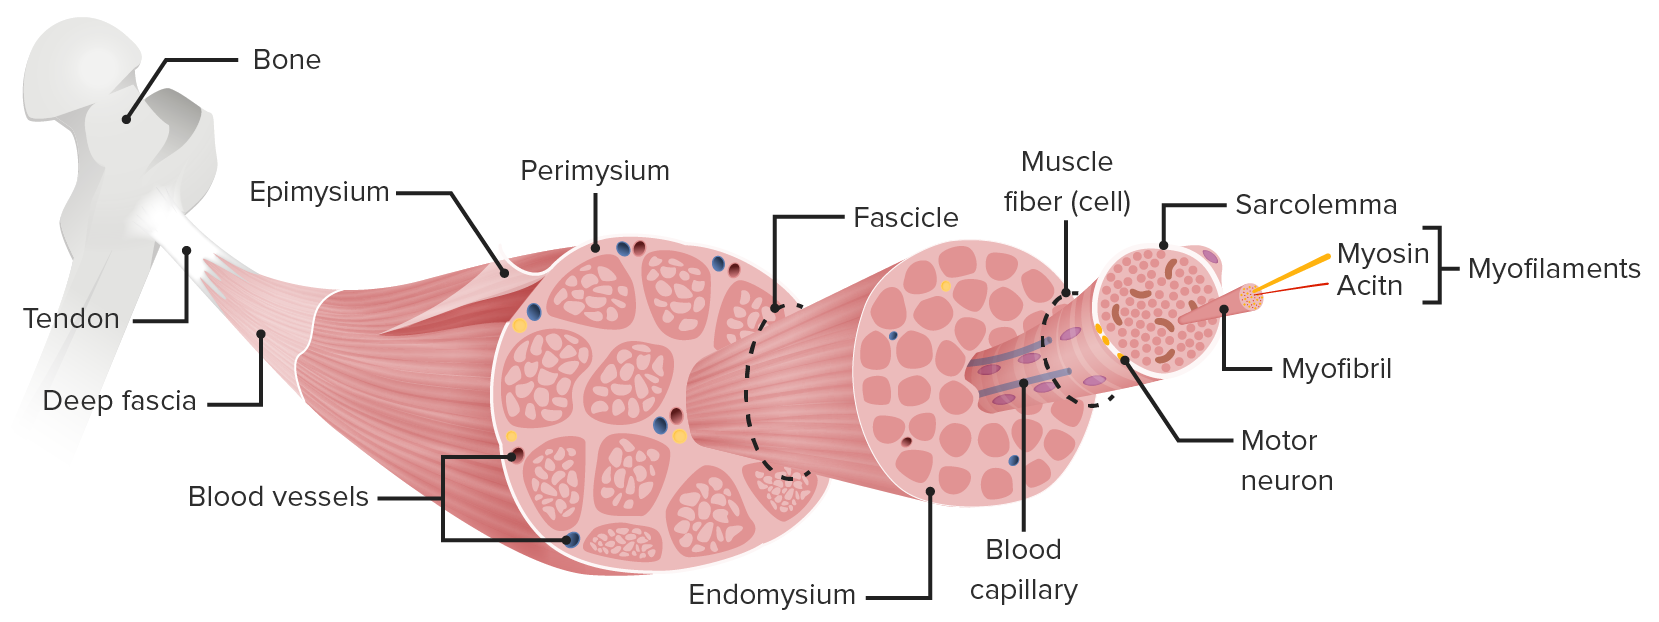 Anatomy Of A Skeletal Muscle Fiber Cell My XXX Hot Girl